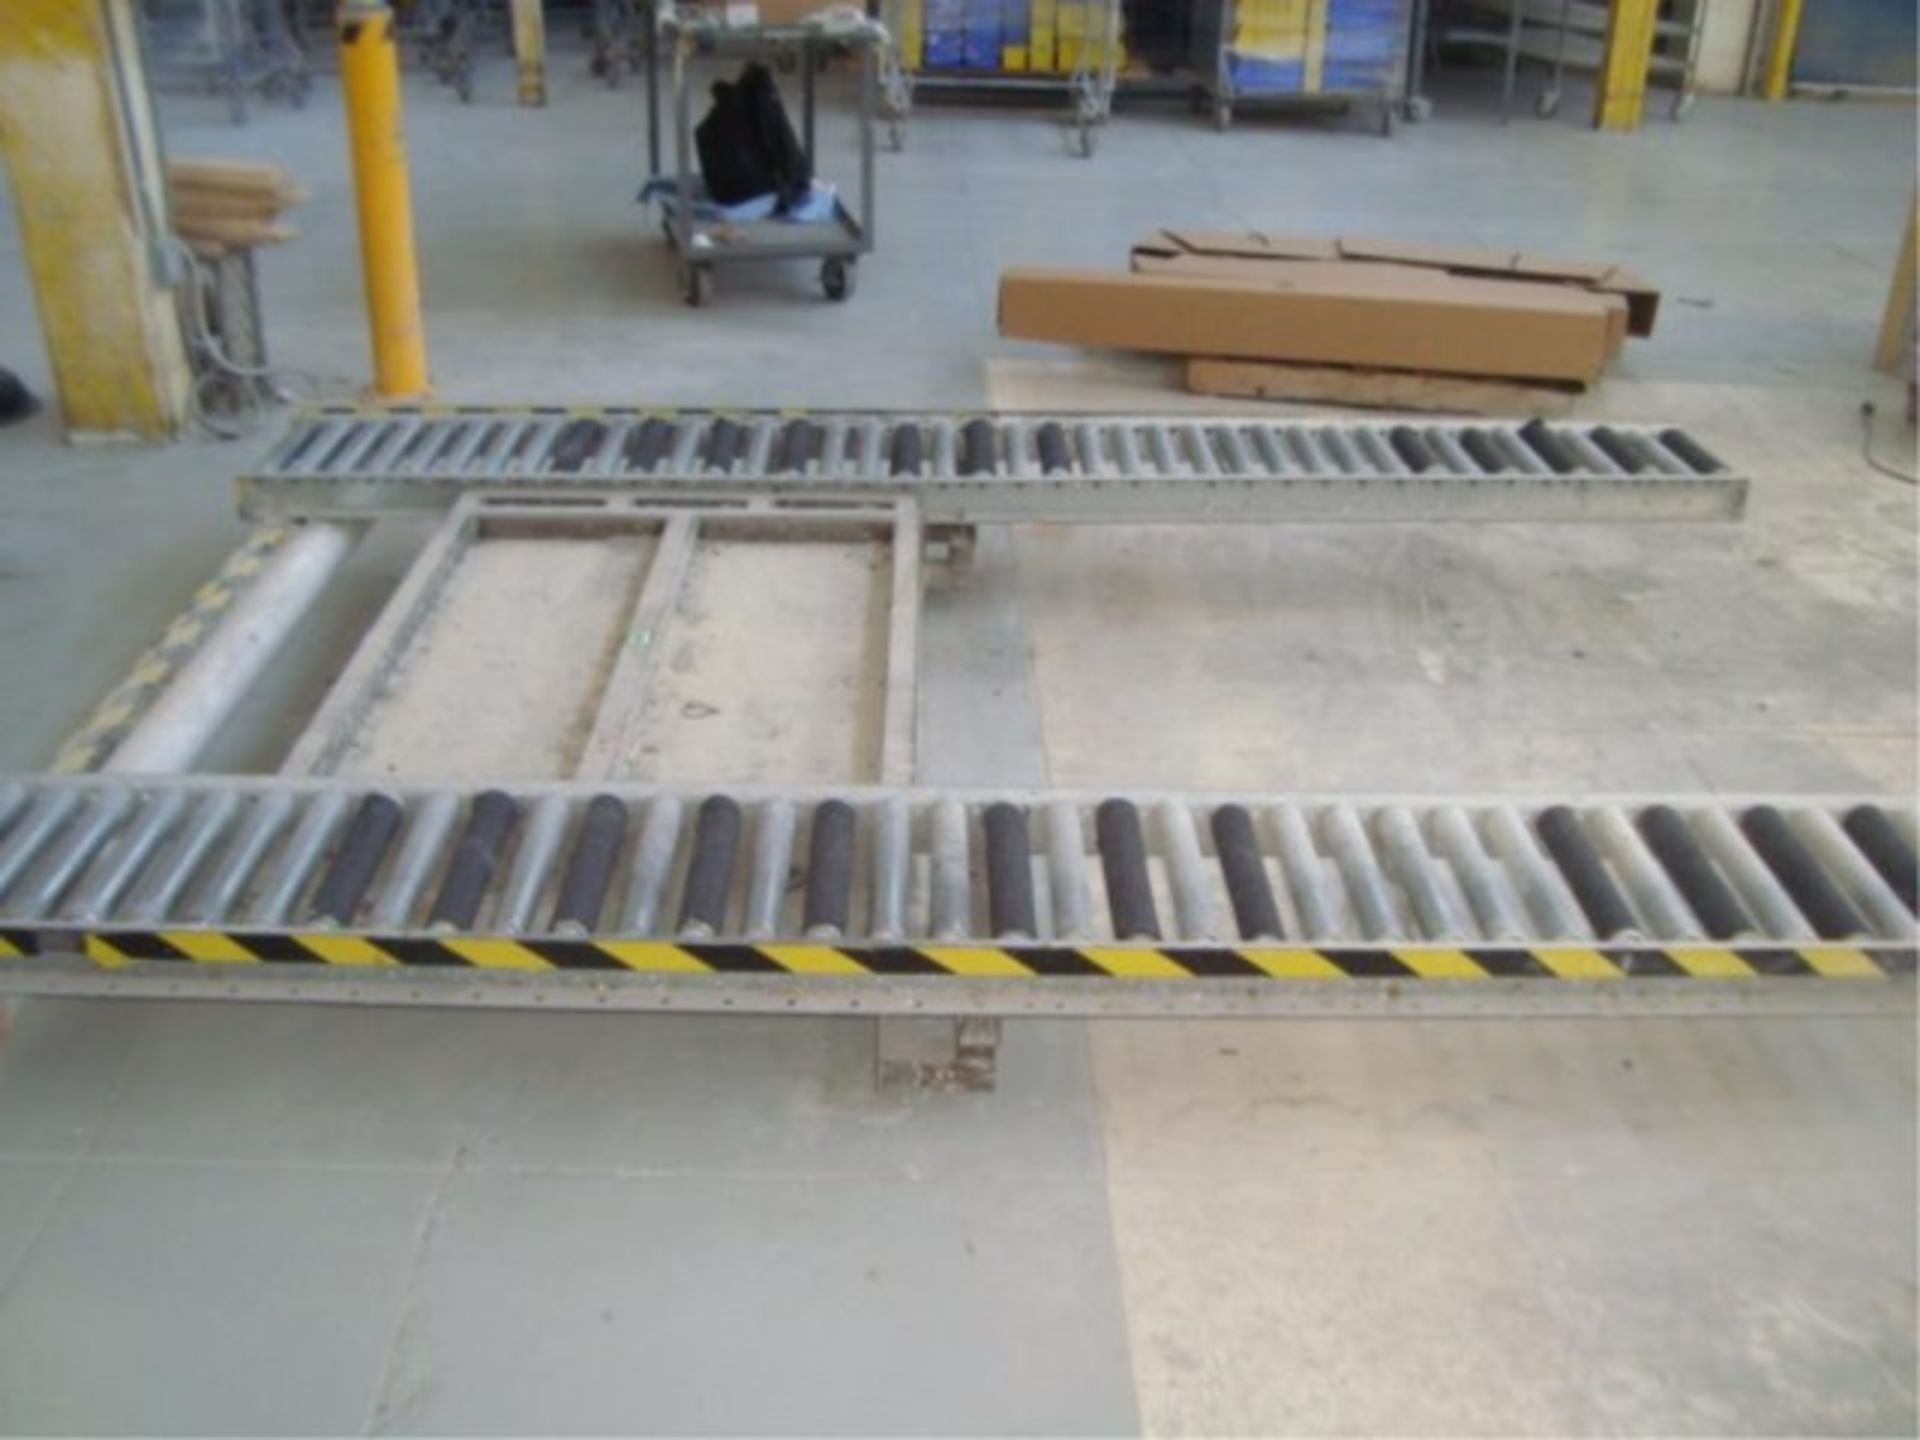 Electric Backsaver Lift Table - Image 2 of 9